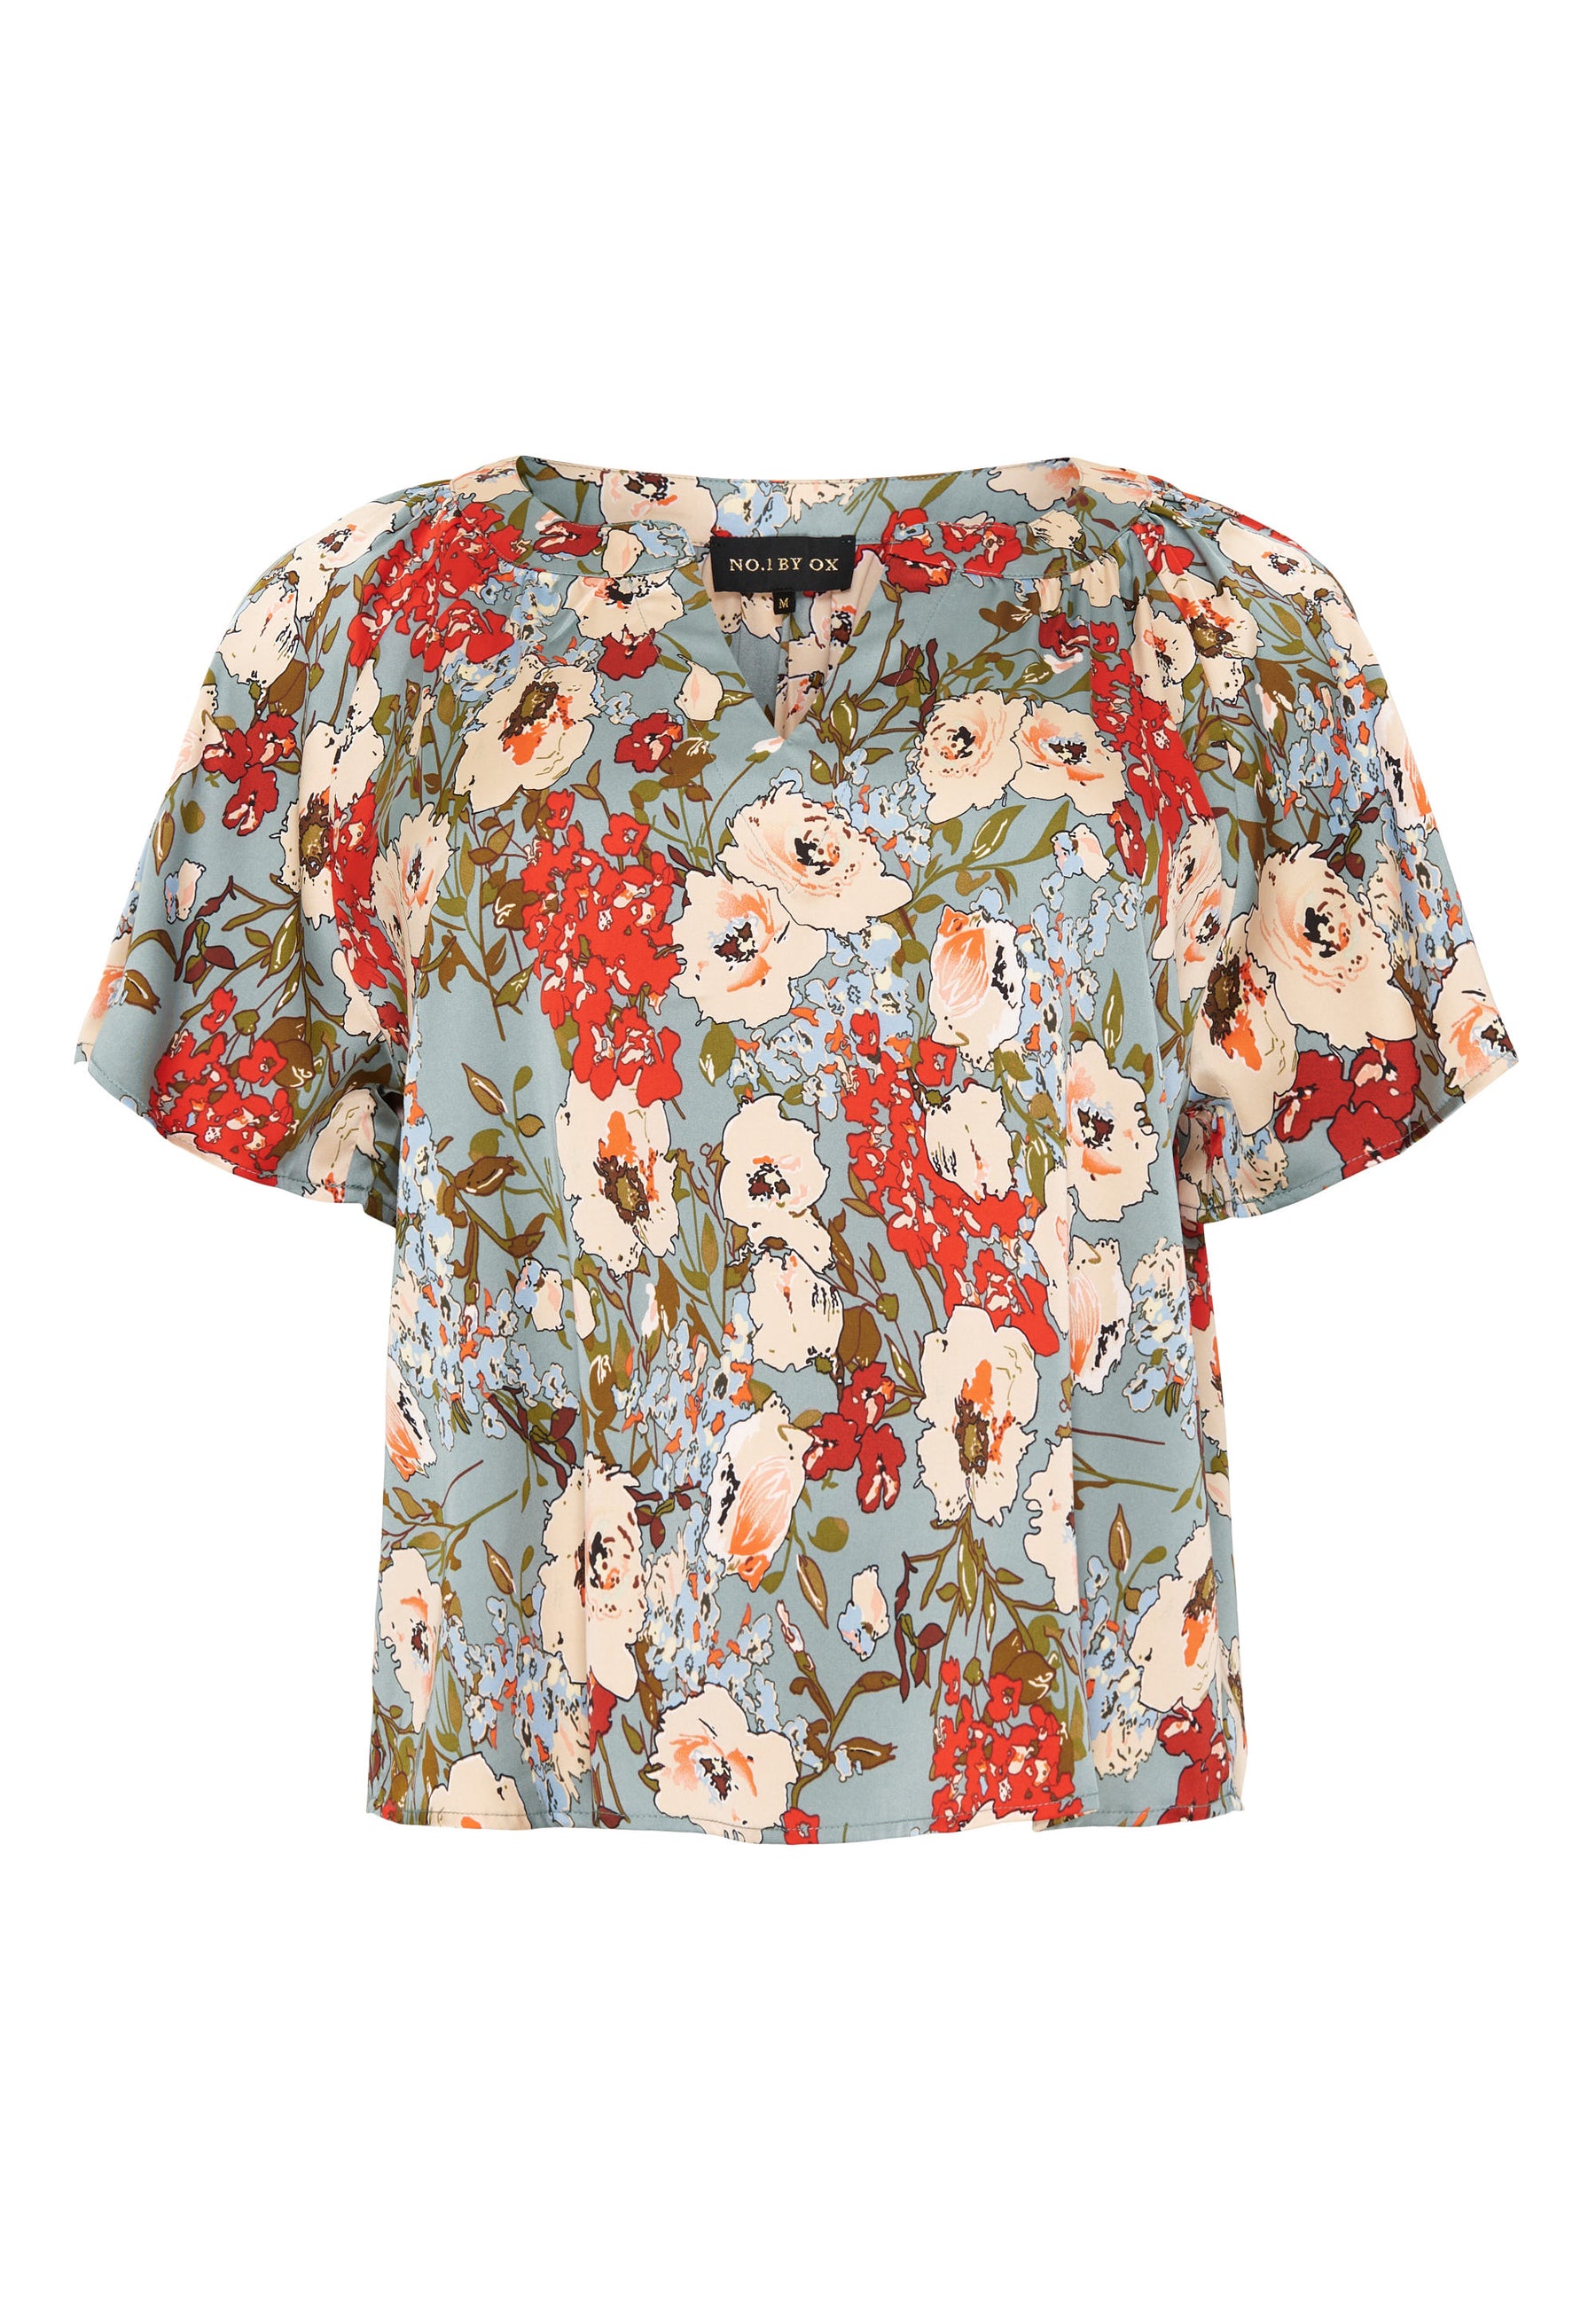 NO. 1 BY OX Bluse i blomsterprint Bluser Multi